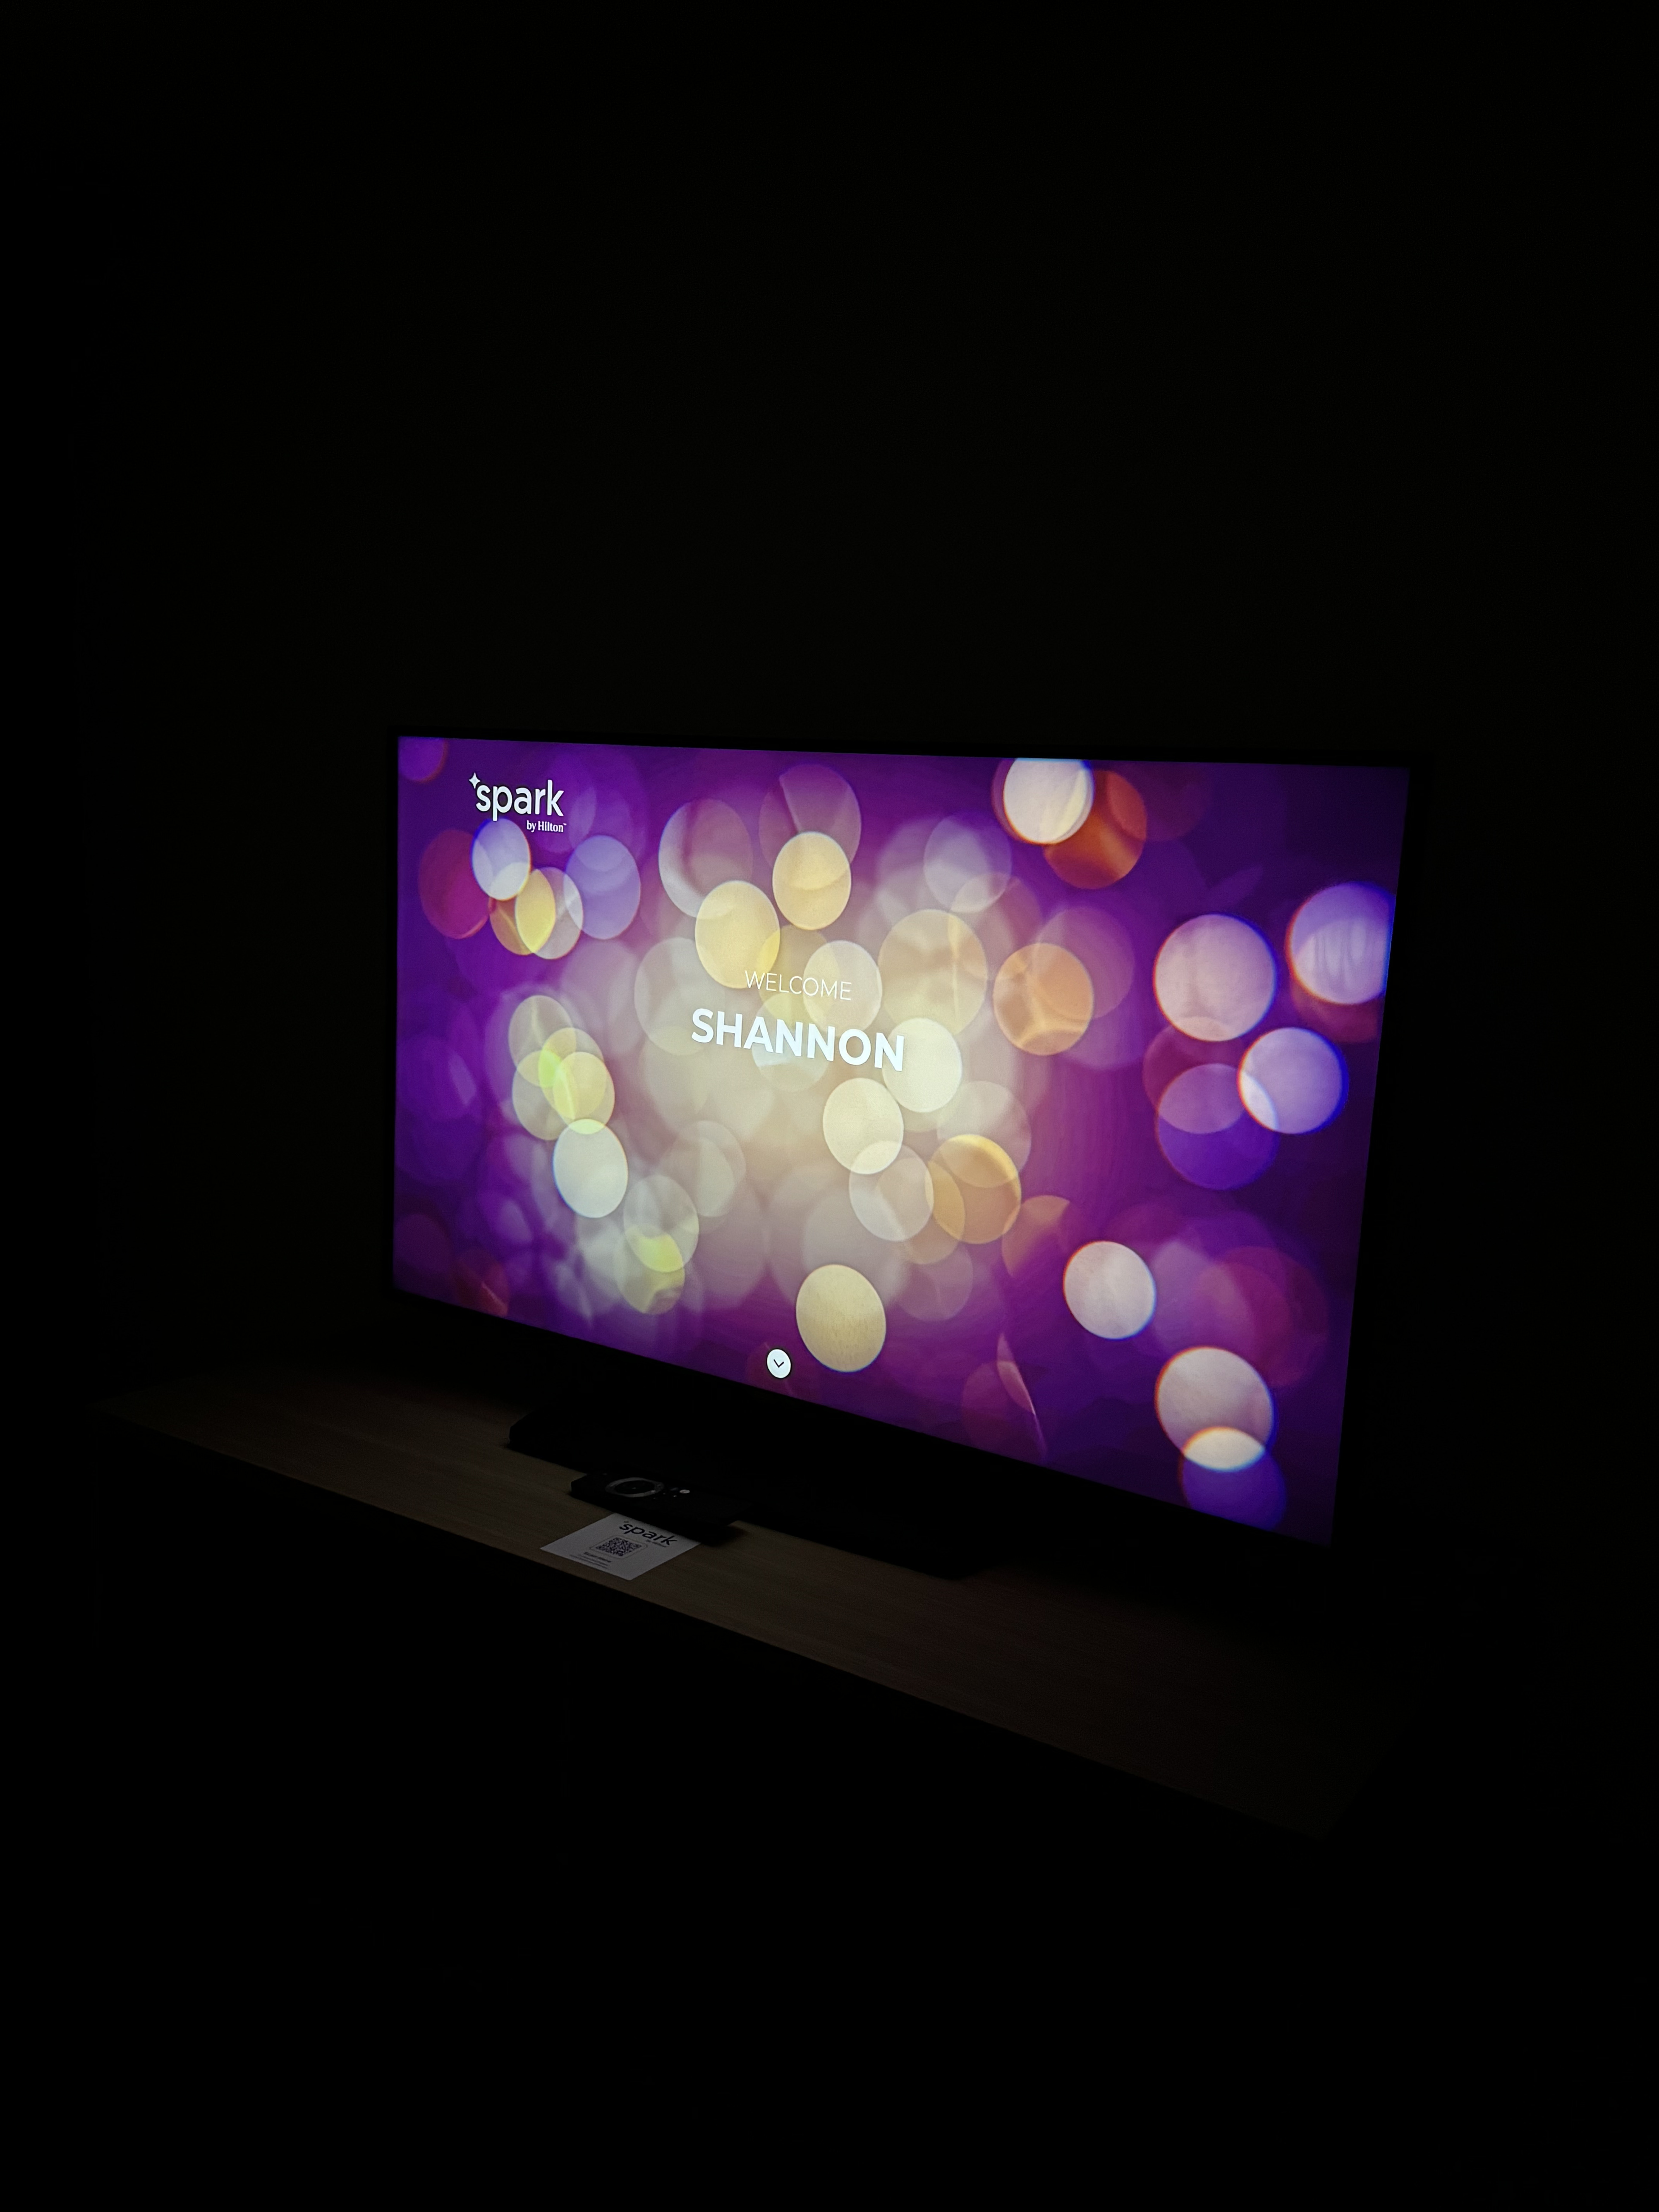 A flatscreen TV showing the words &#039;Welcome, Shannon' with a flowery background.